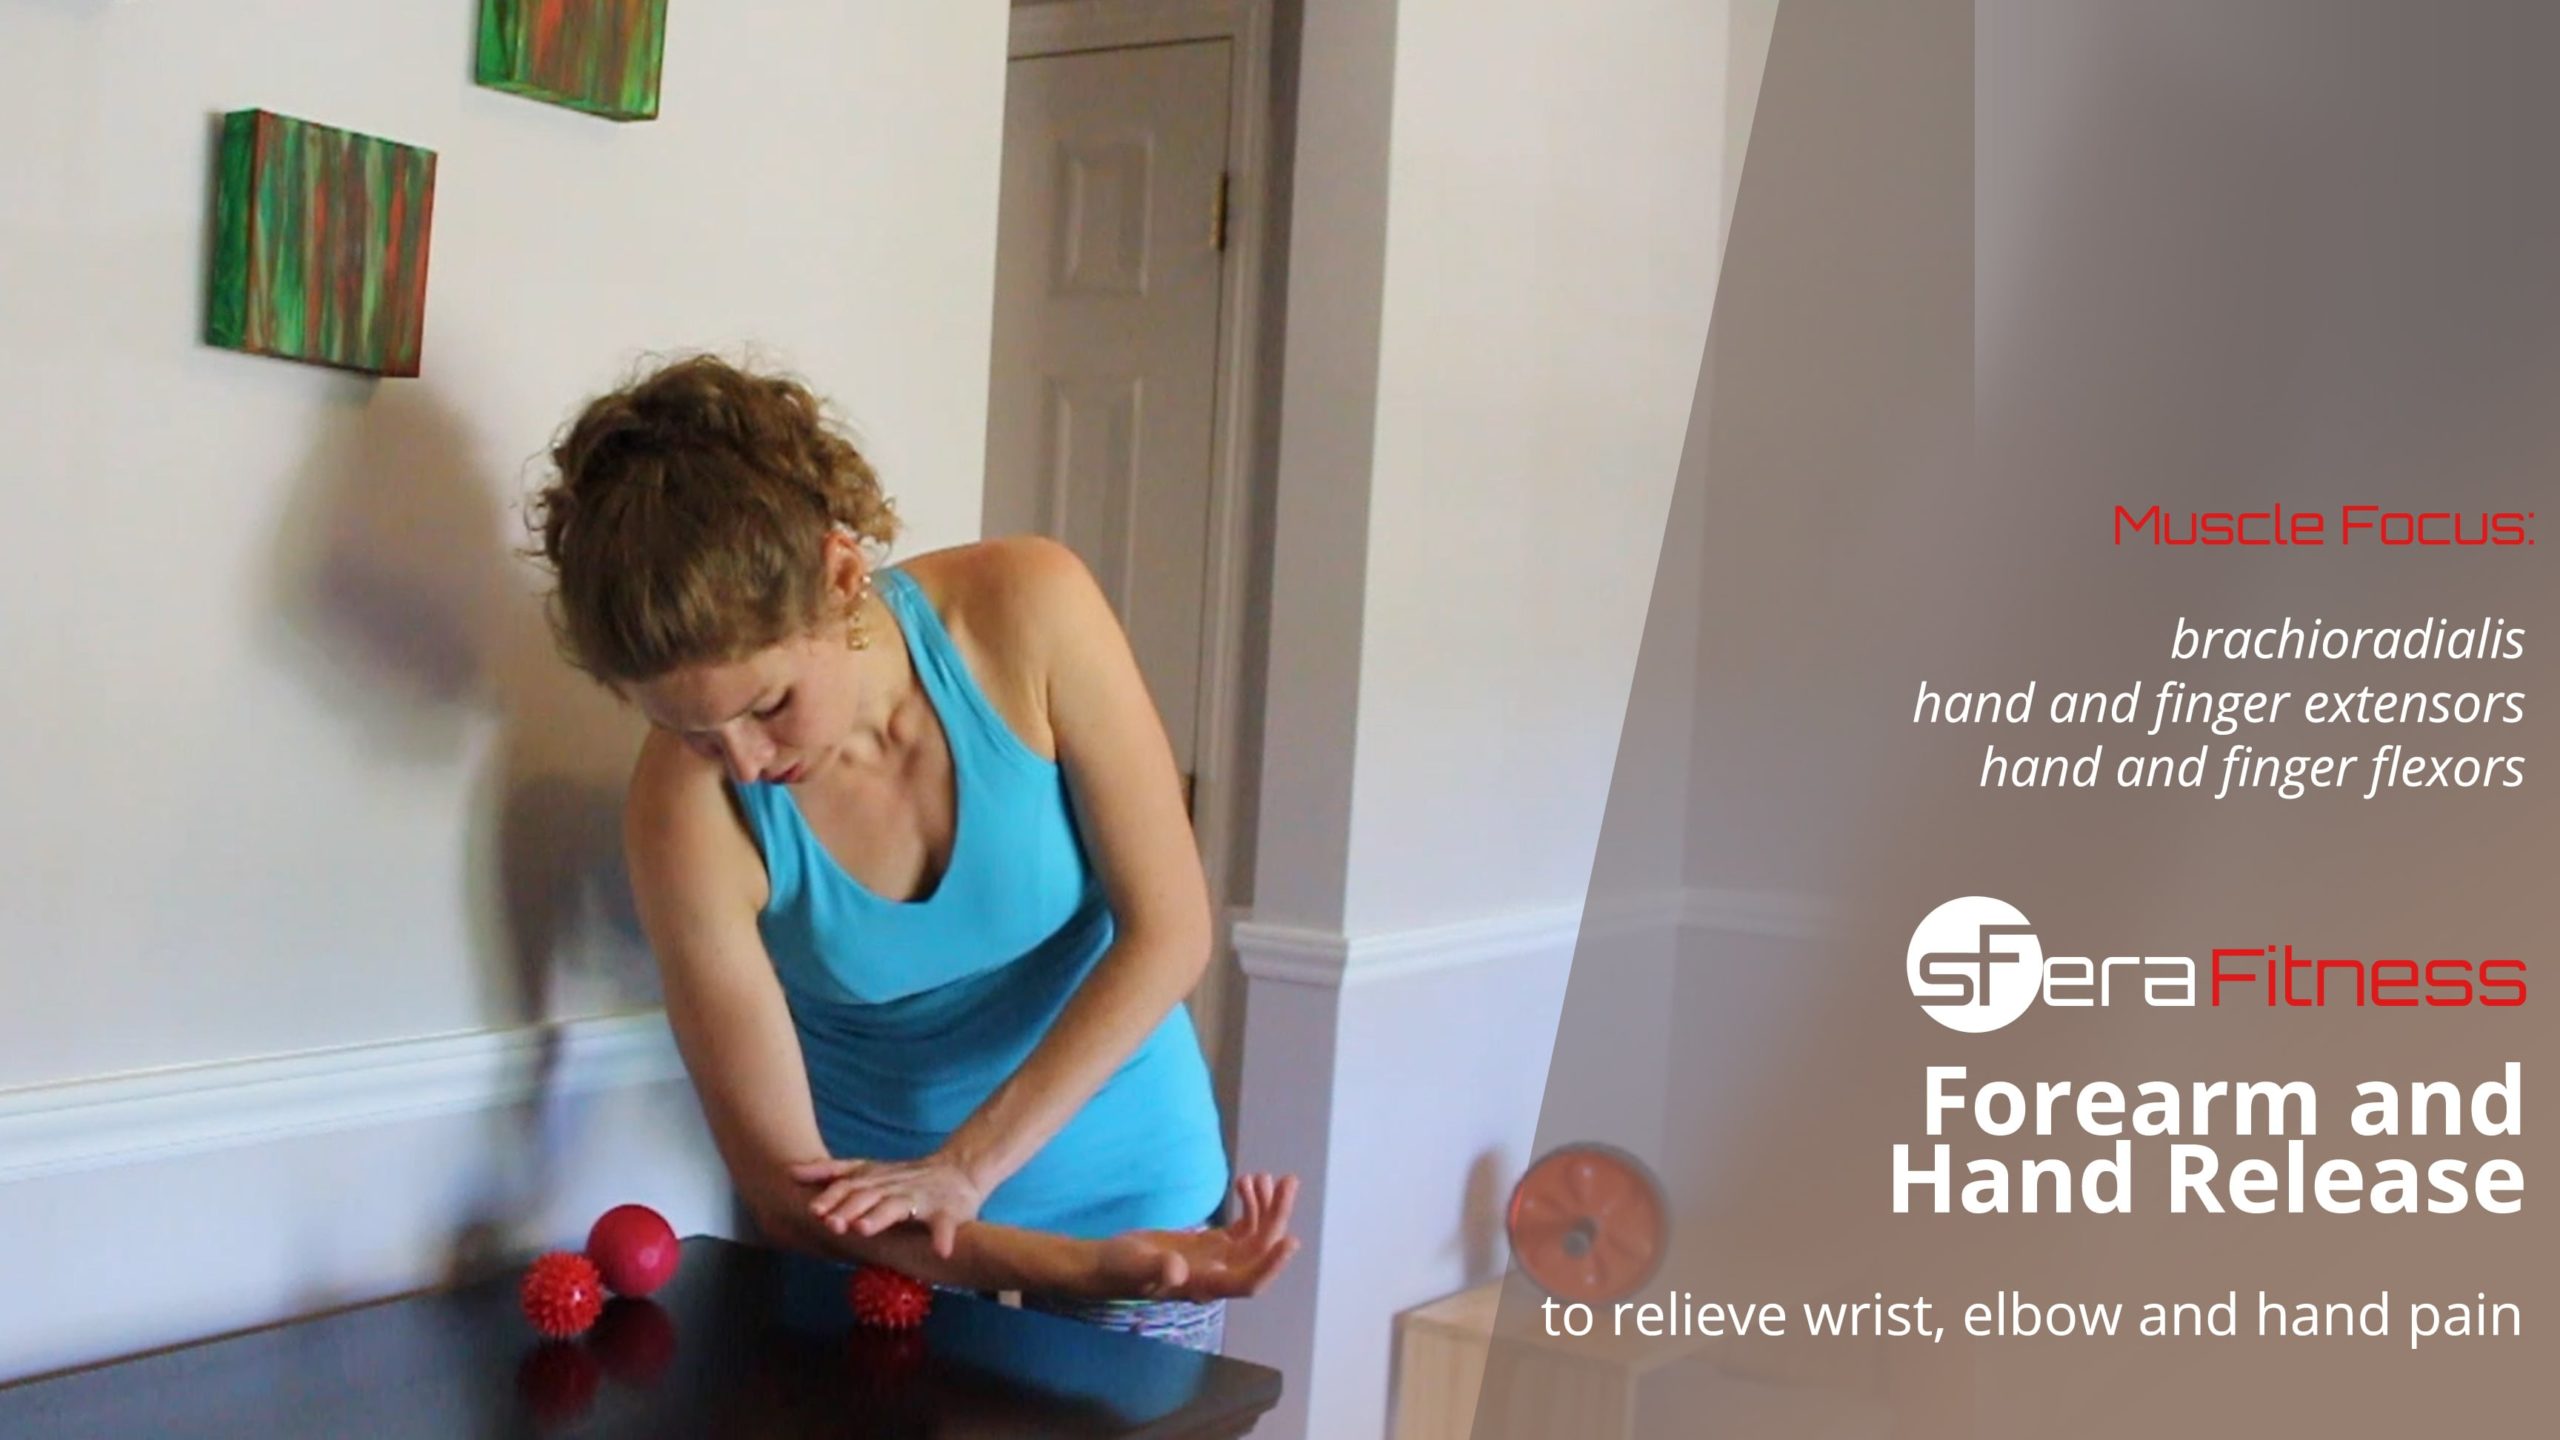 Forearm and Hand Release to Relieve Wrist, Elbow and Hand Pain